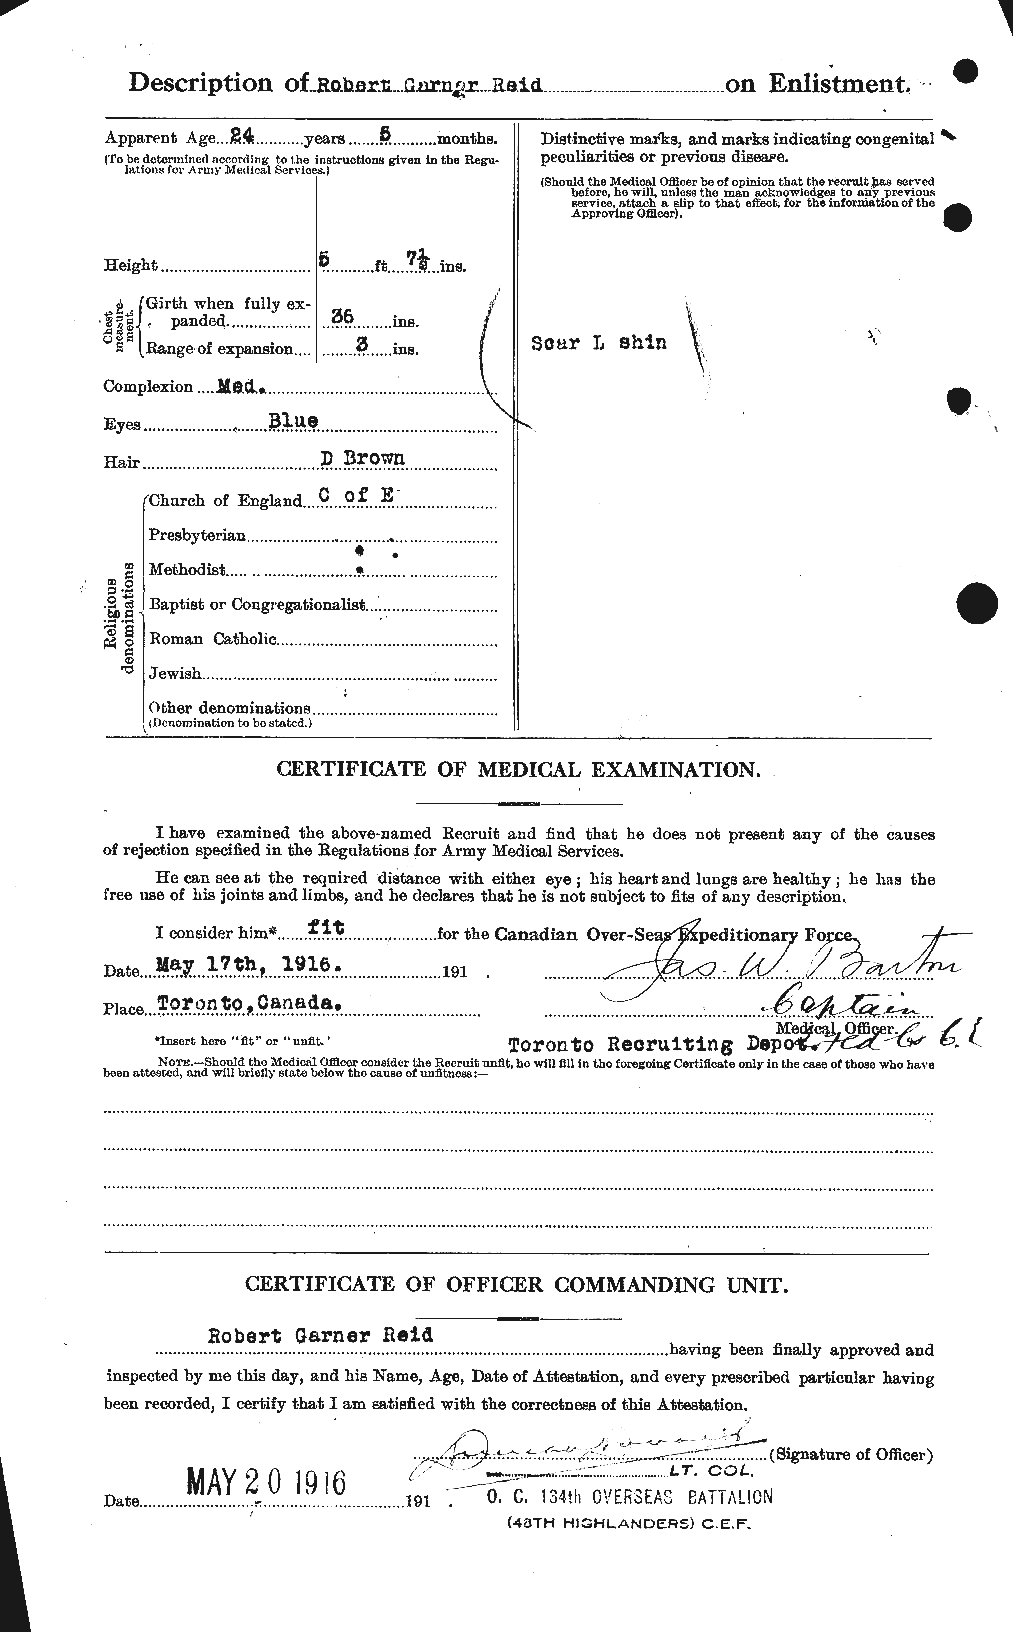 Personnel Records of the First World War - CEF 601900b